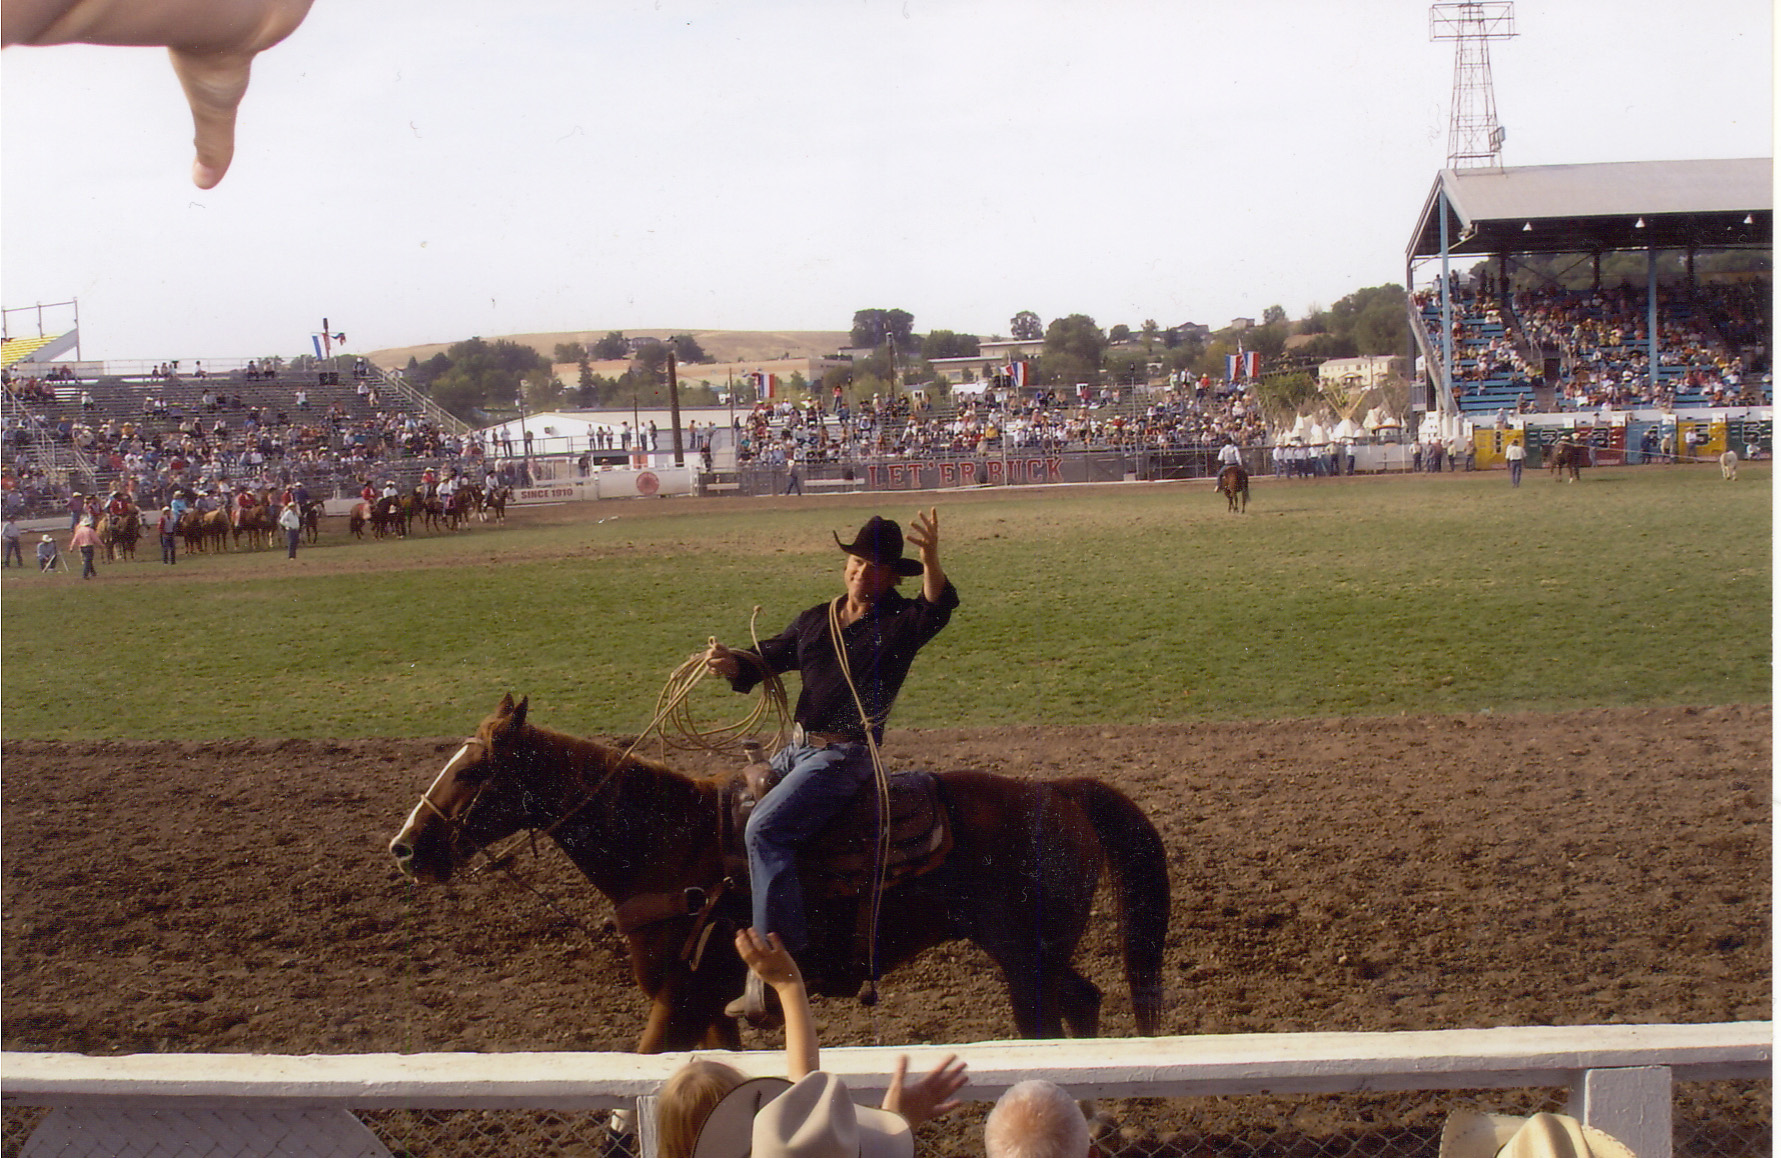 At the Pendleton Round-Up